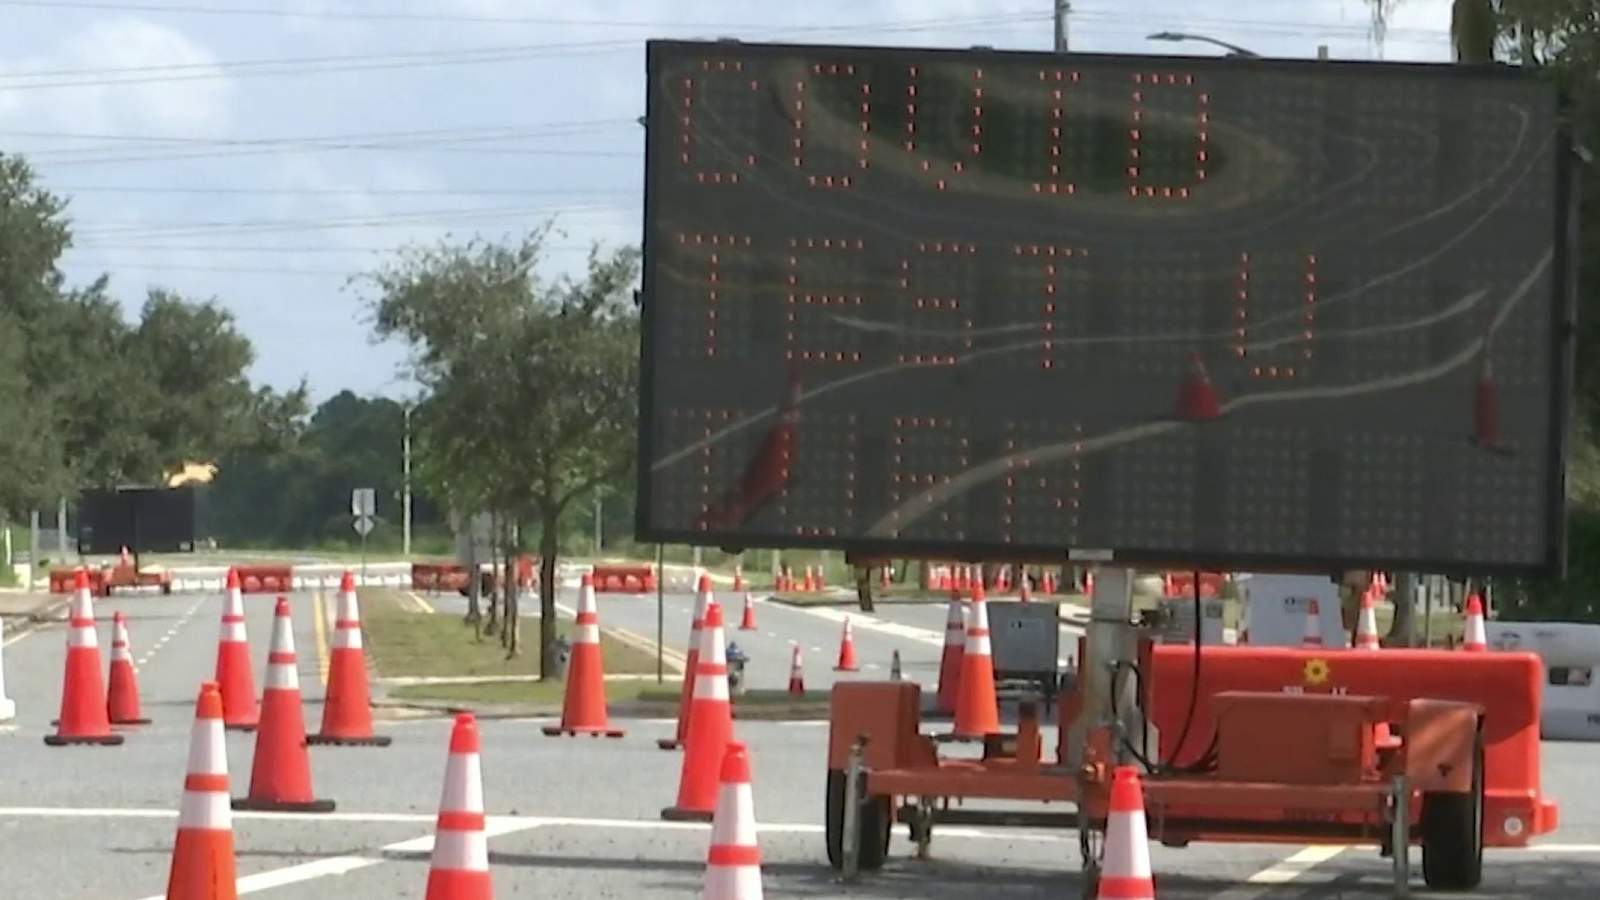 Demand down at most COVID-19 testing sites across Florida